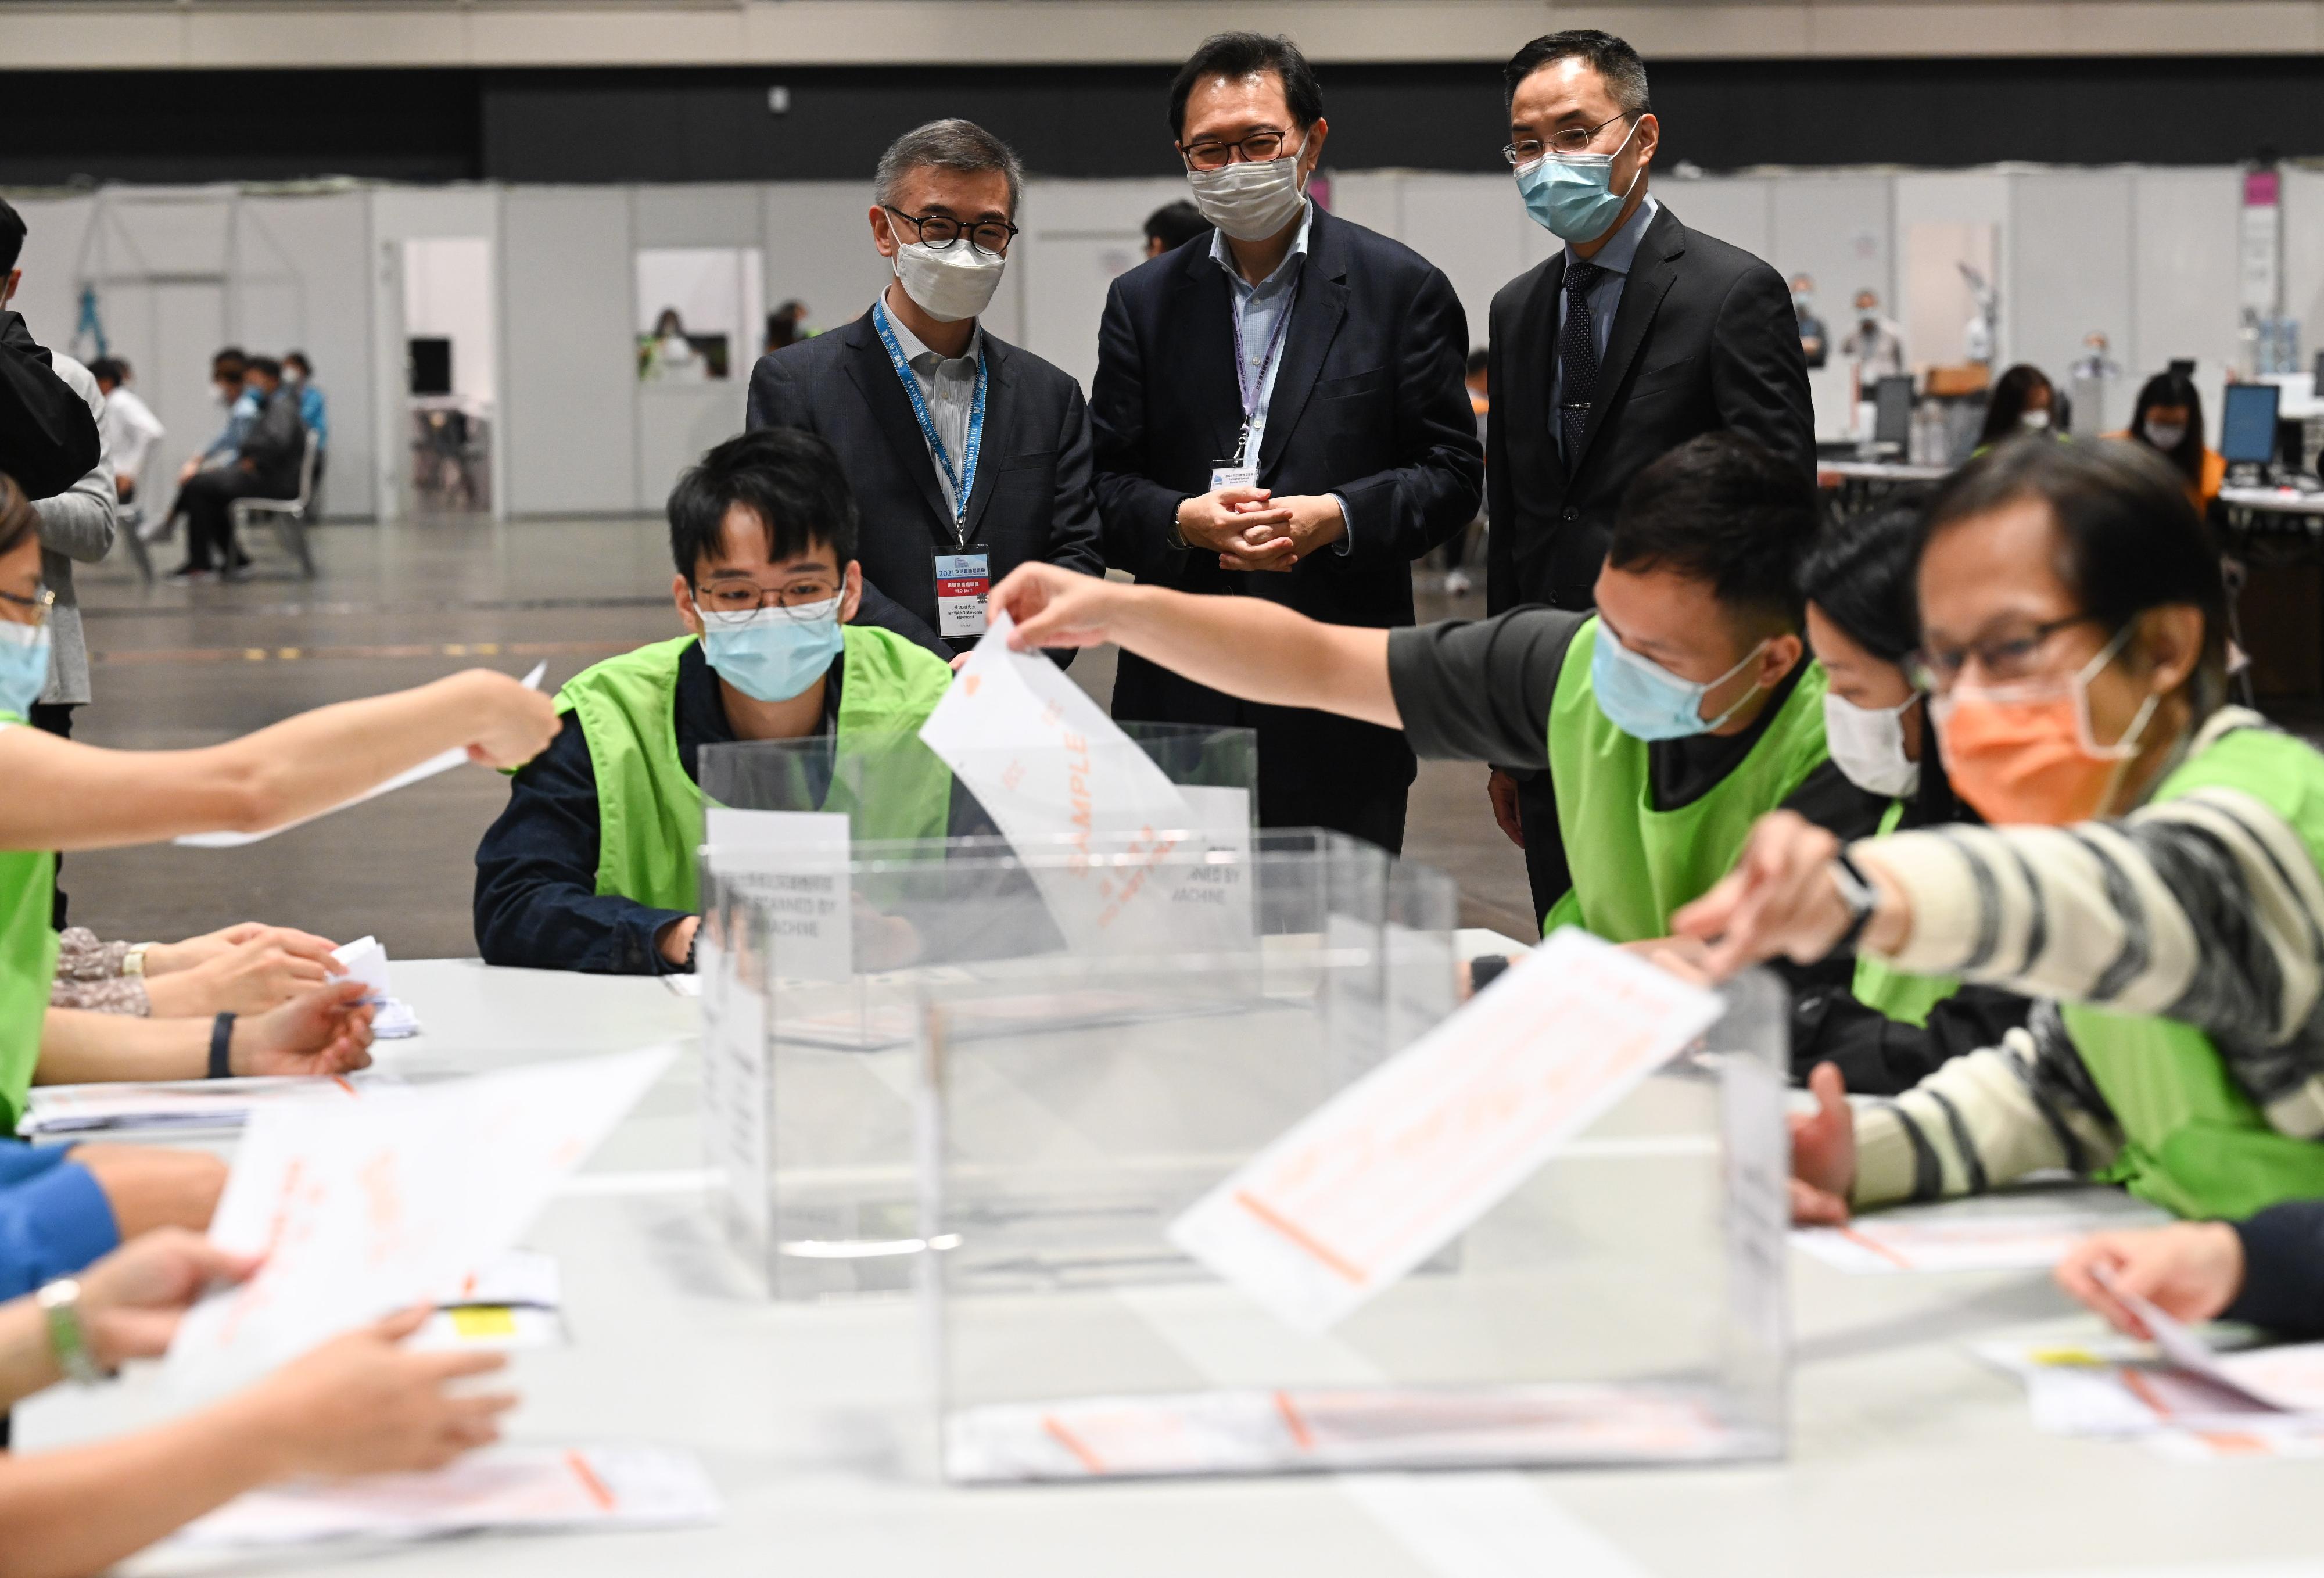 The Chairman of the Electoral Affairs Commission, Mr Justice Barnabas Fung Wah (back row, centre), visits the central counting station of the 2021 Legislative Council General Election at the Hong Kong Convention and Exhibition Centre and inspected the training sessions with practical sessions and simulated activities for counting staff. Also present are the Permanent Secretary for Constitutional and Mainland Affairs, Mr Roy Tang (back row, right), and the Senior Principal Executive Officer (Elections) of the Registration and Electoral Office, Mr Raymond Wang (back row, left).